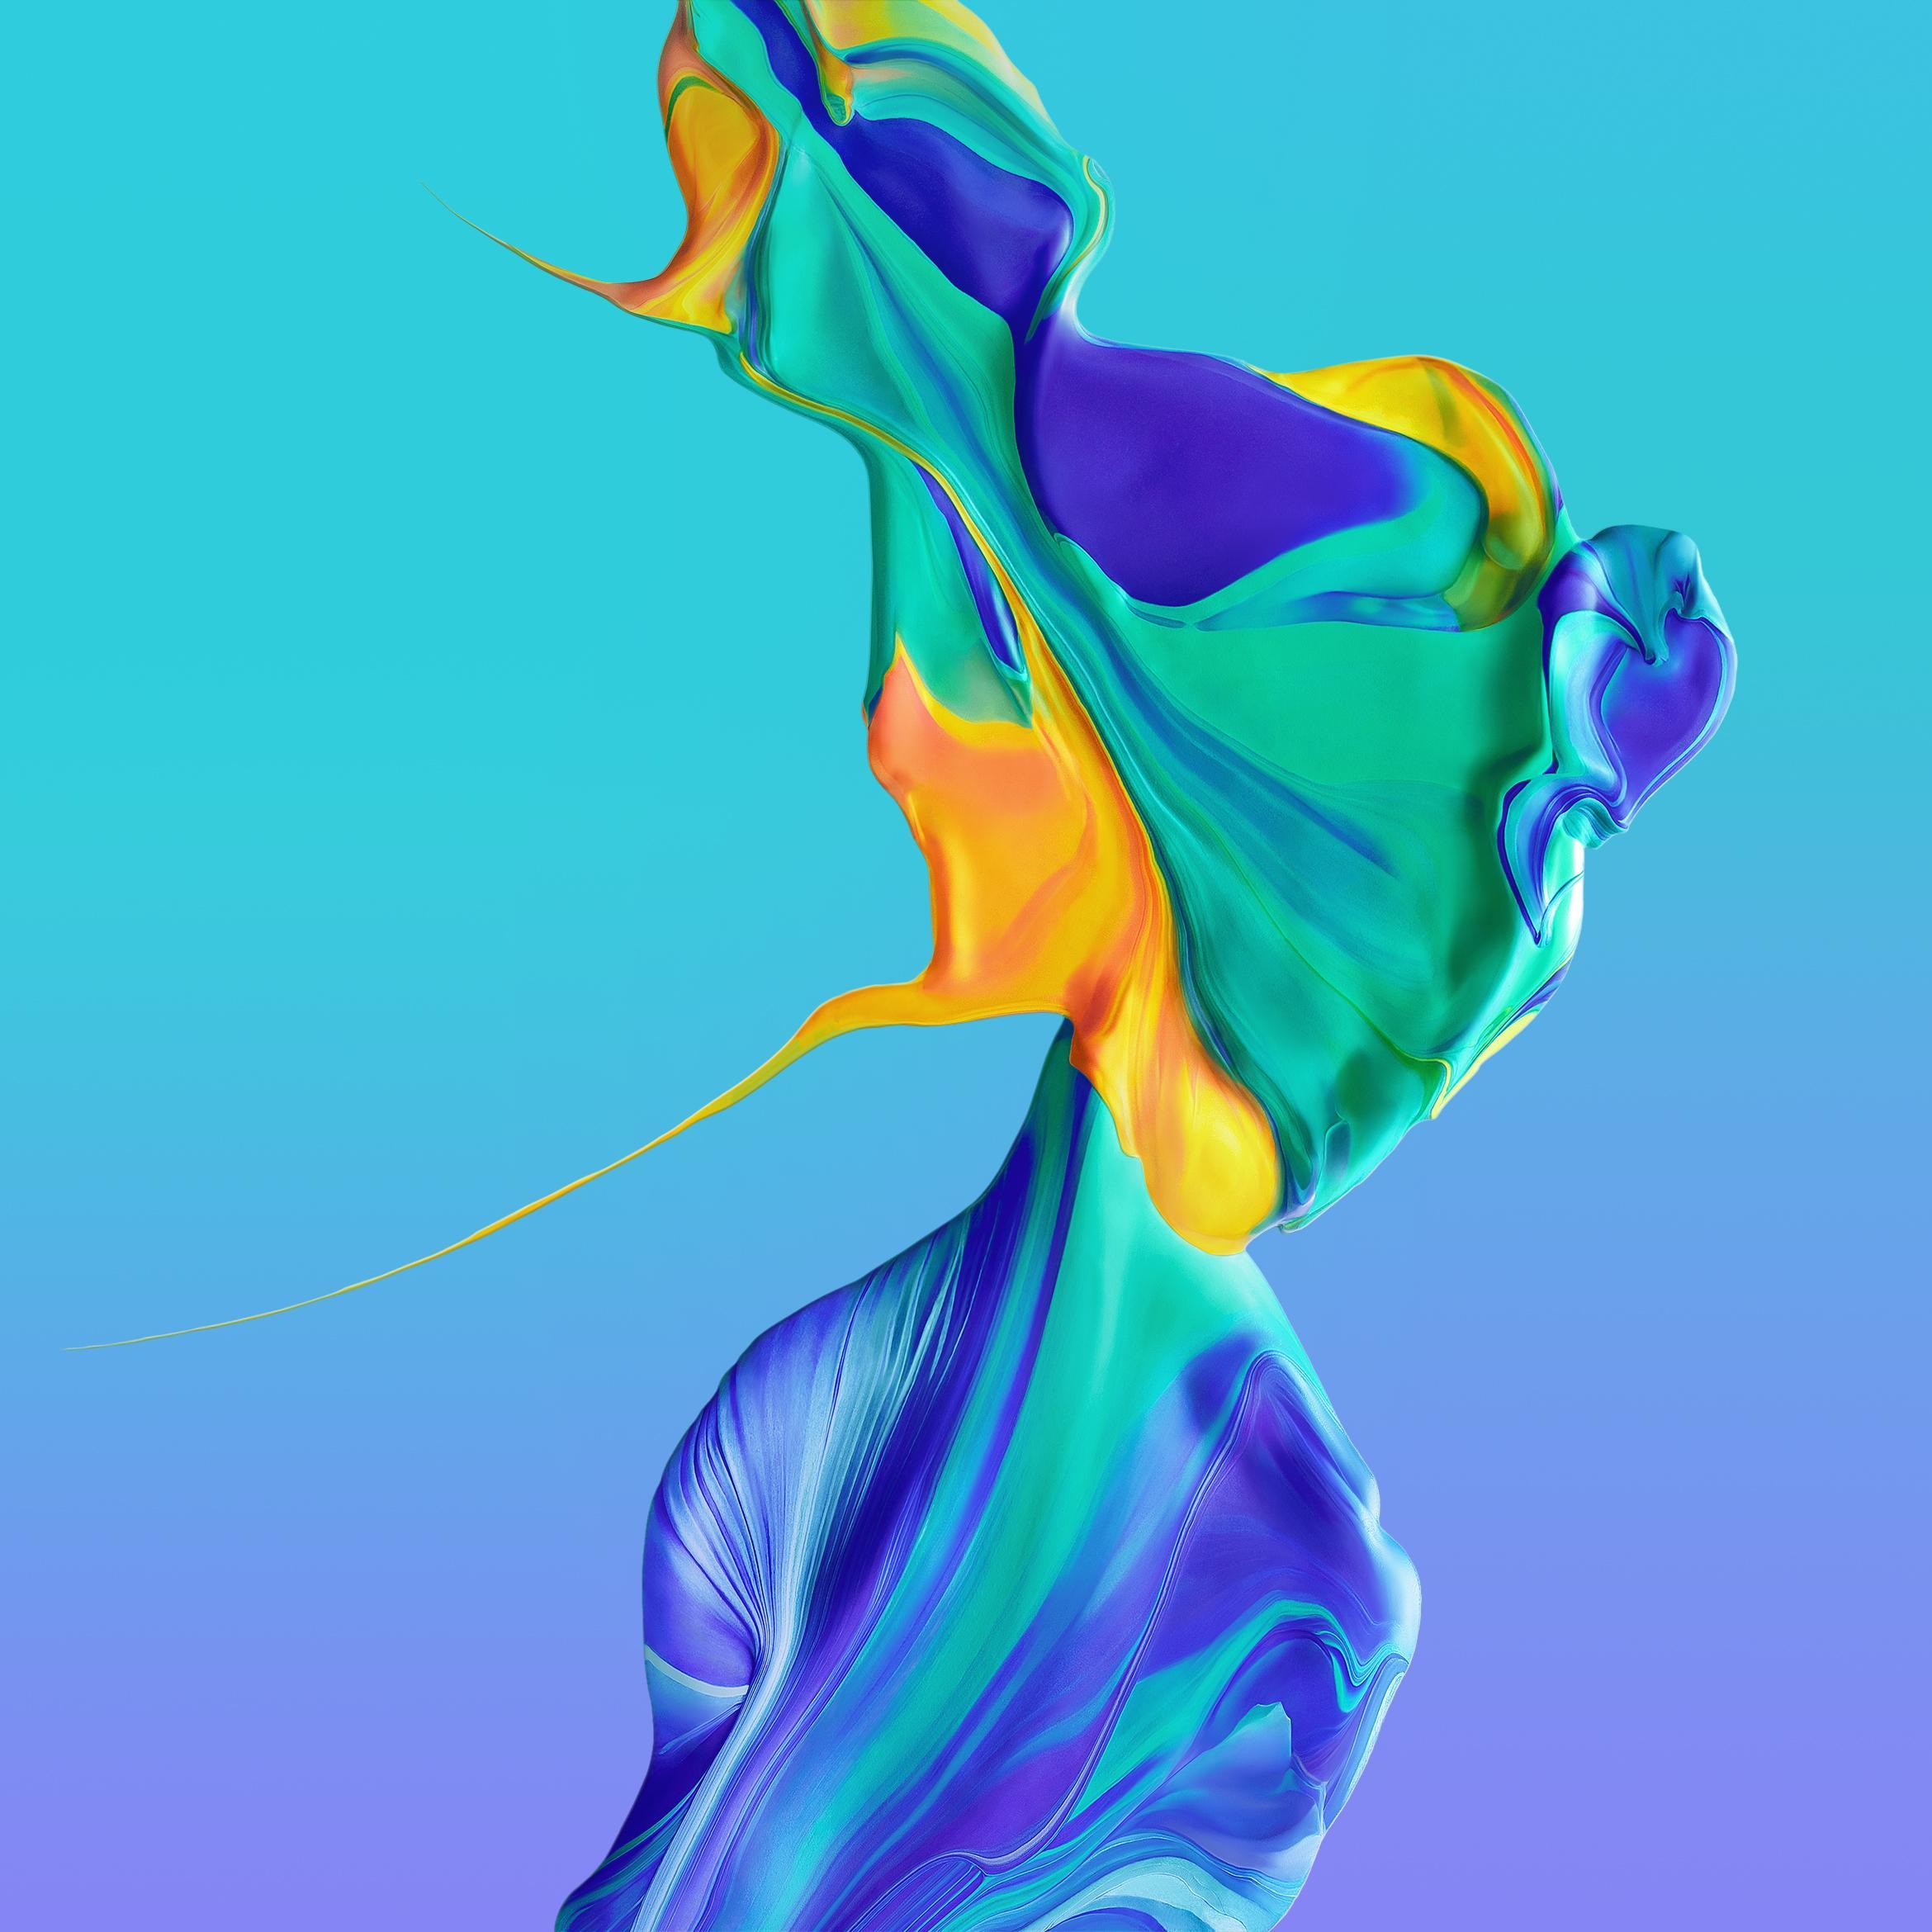 Wallpapers] Huawei P30/P30 Pro Wallpapers here to download!